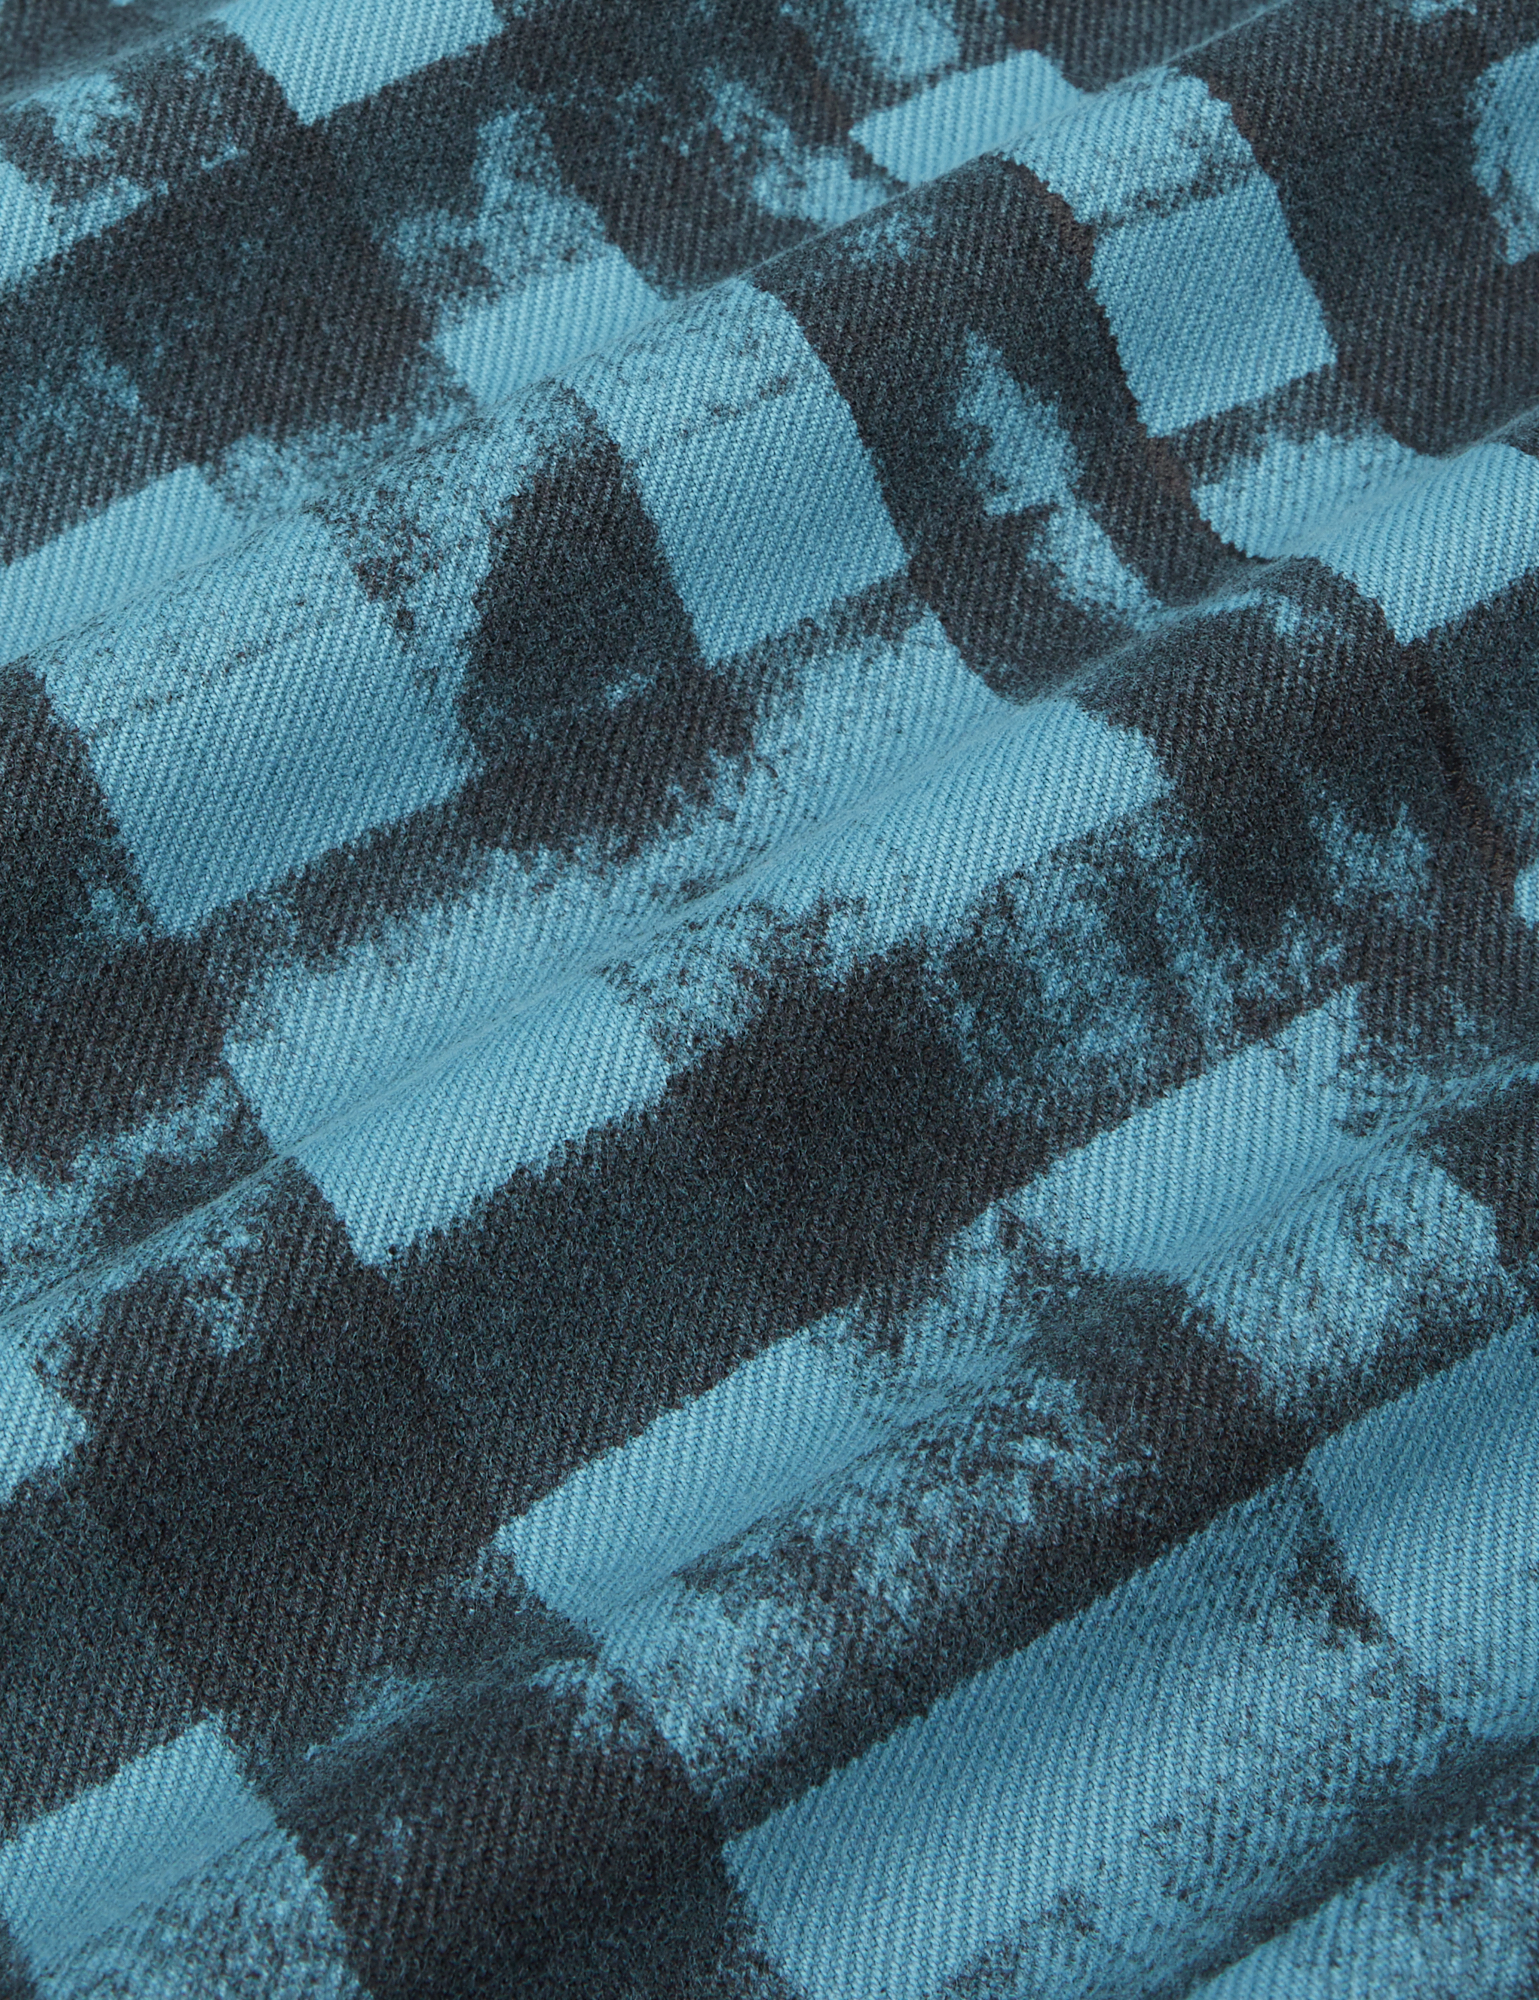 Plaid Flannel Overshirt in Marine Blue fabric detail close up